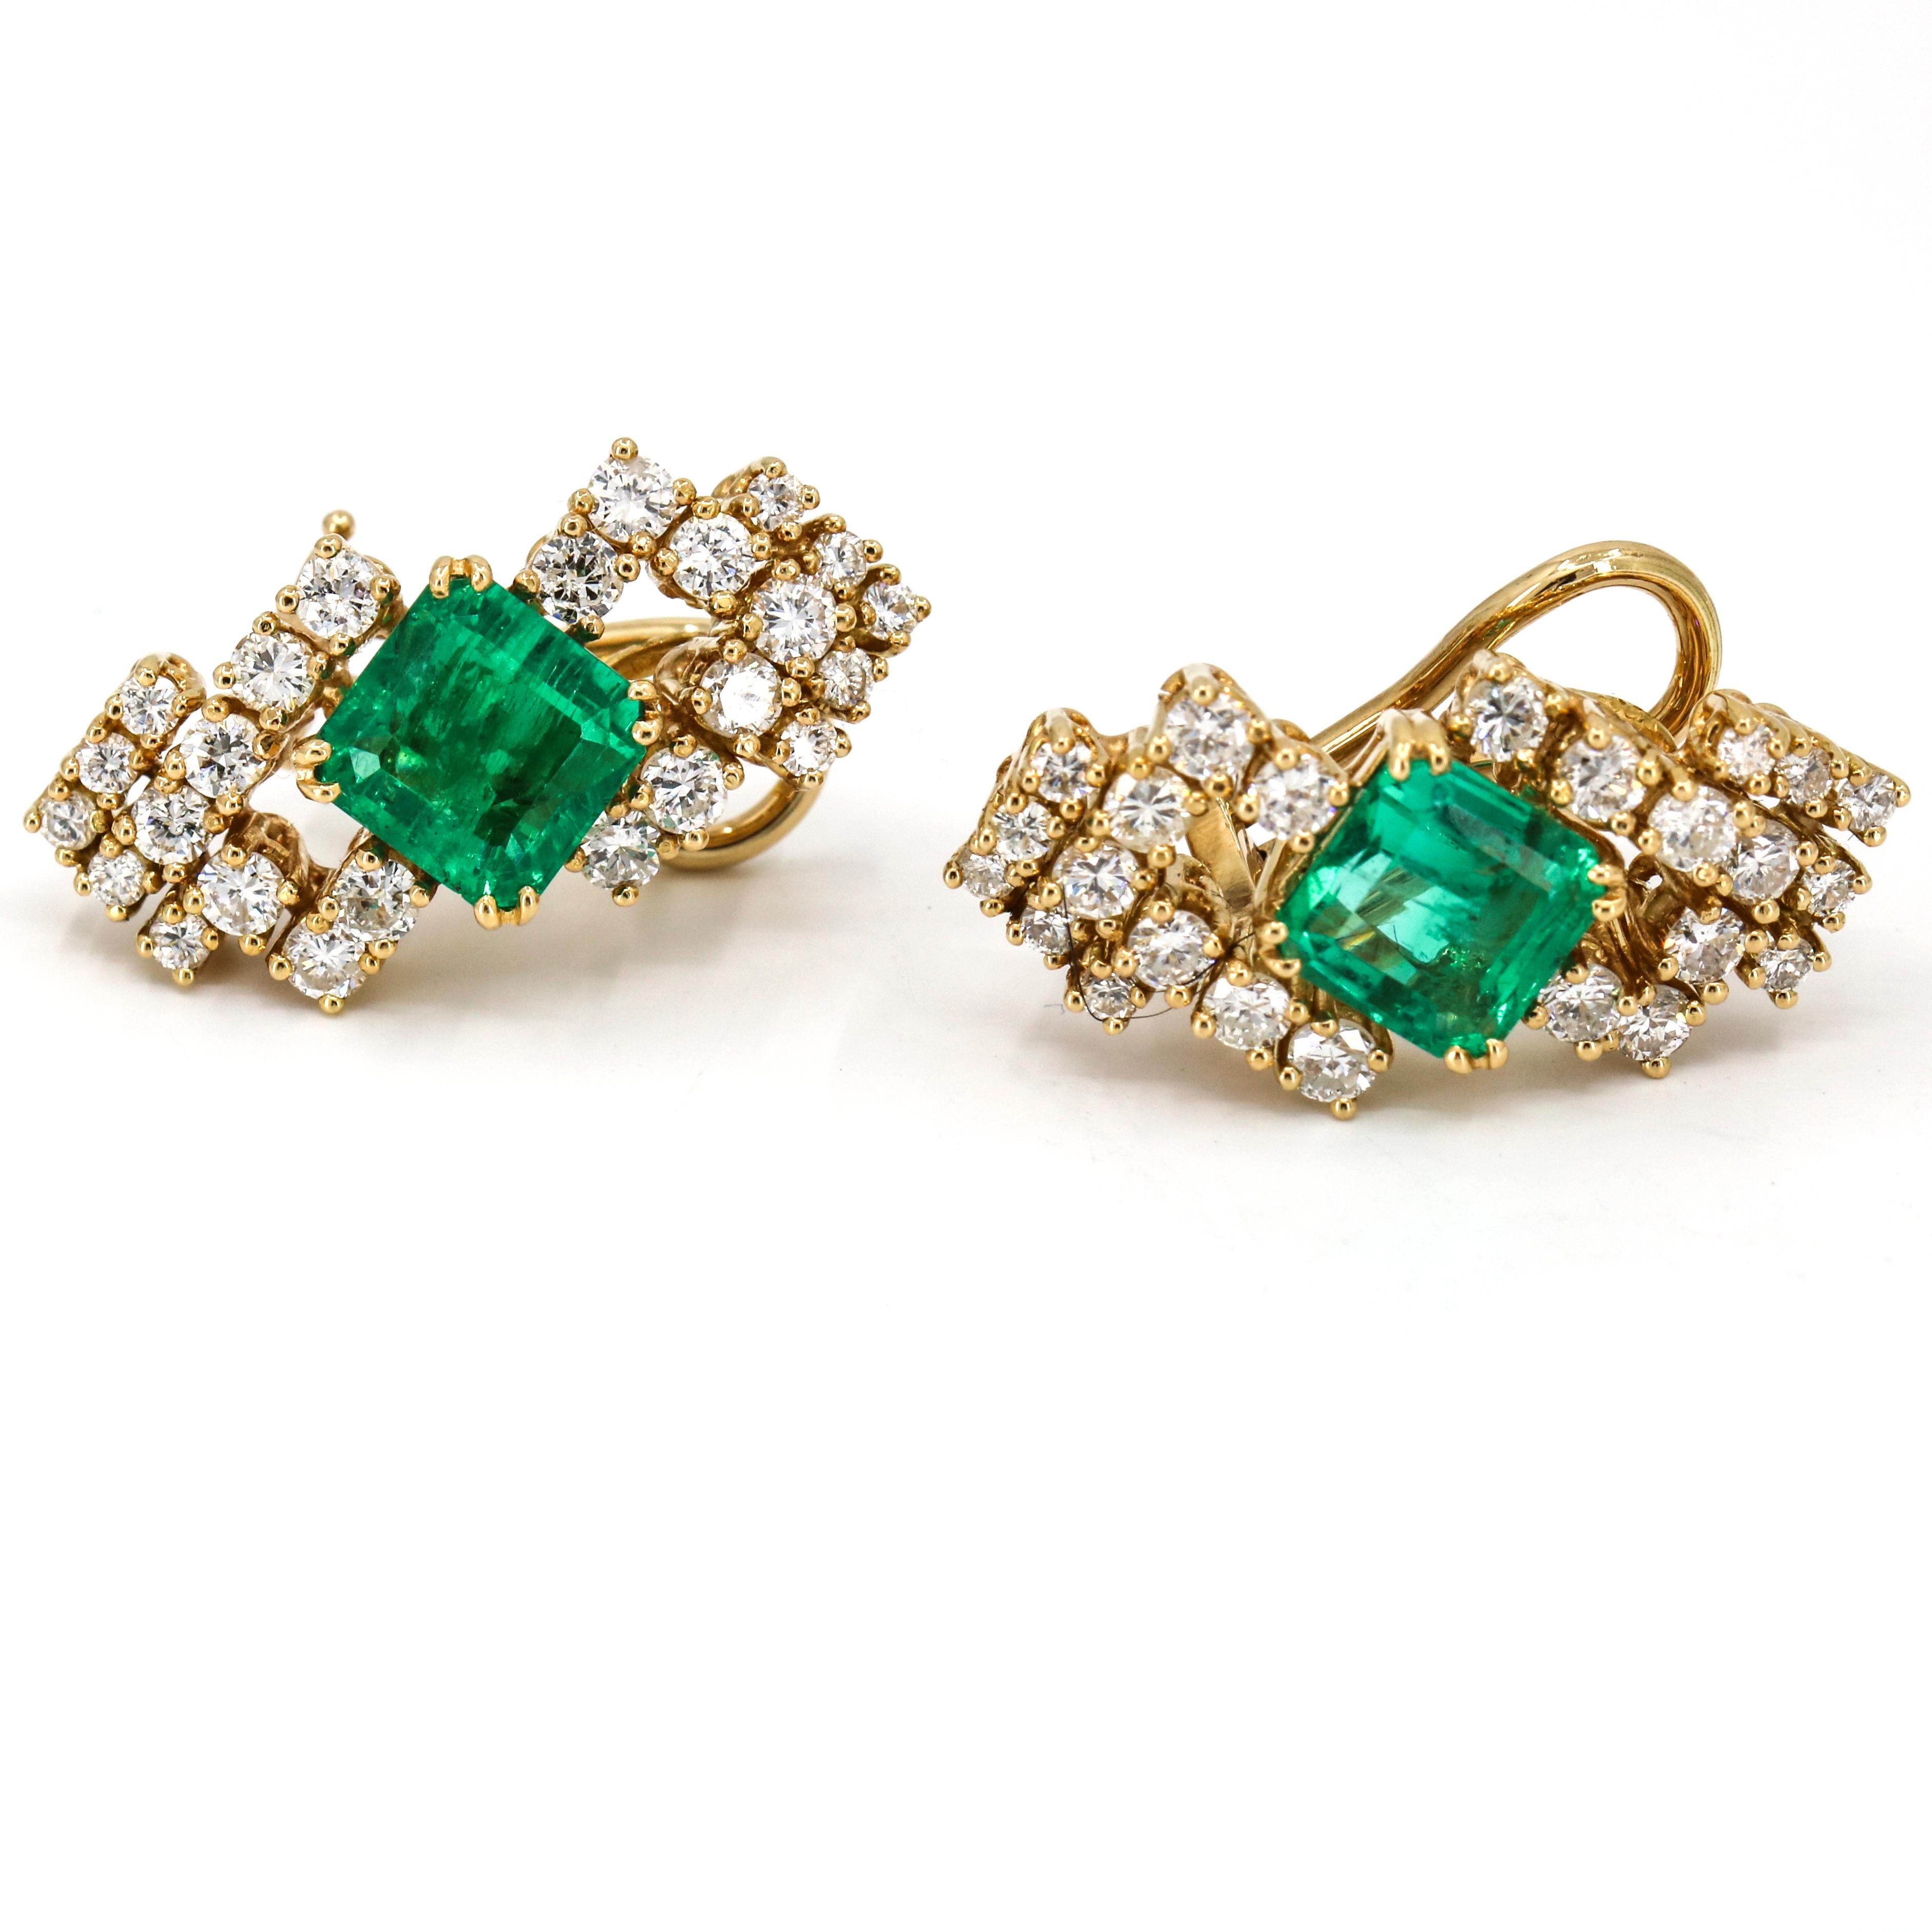 2.50 Carat 18 Karat Yellow Gold Emerald Diamond Shield Earrings In Excellent Condition For Sale In Fort Lauderdale, FL